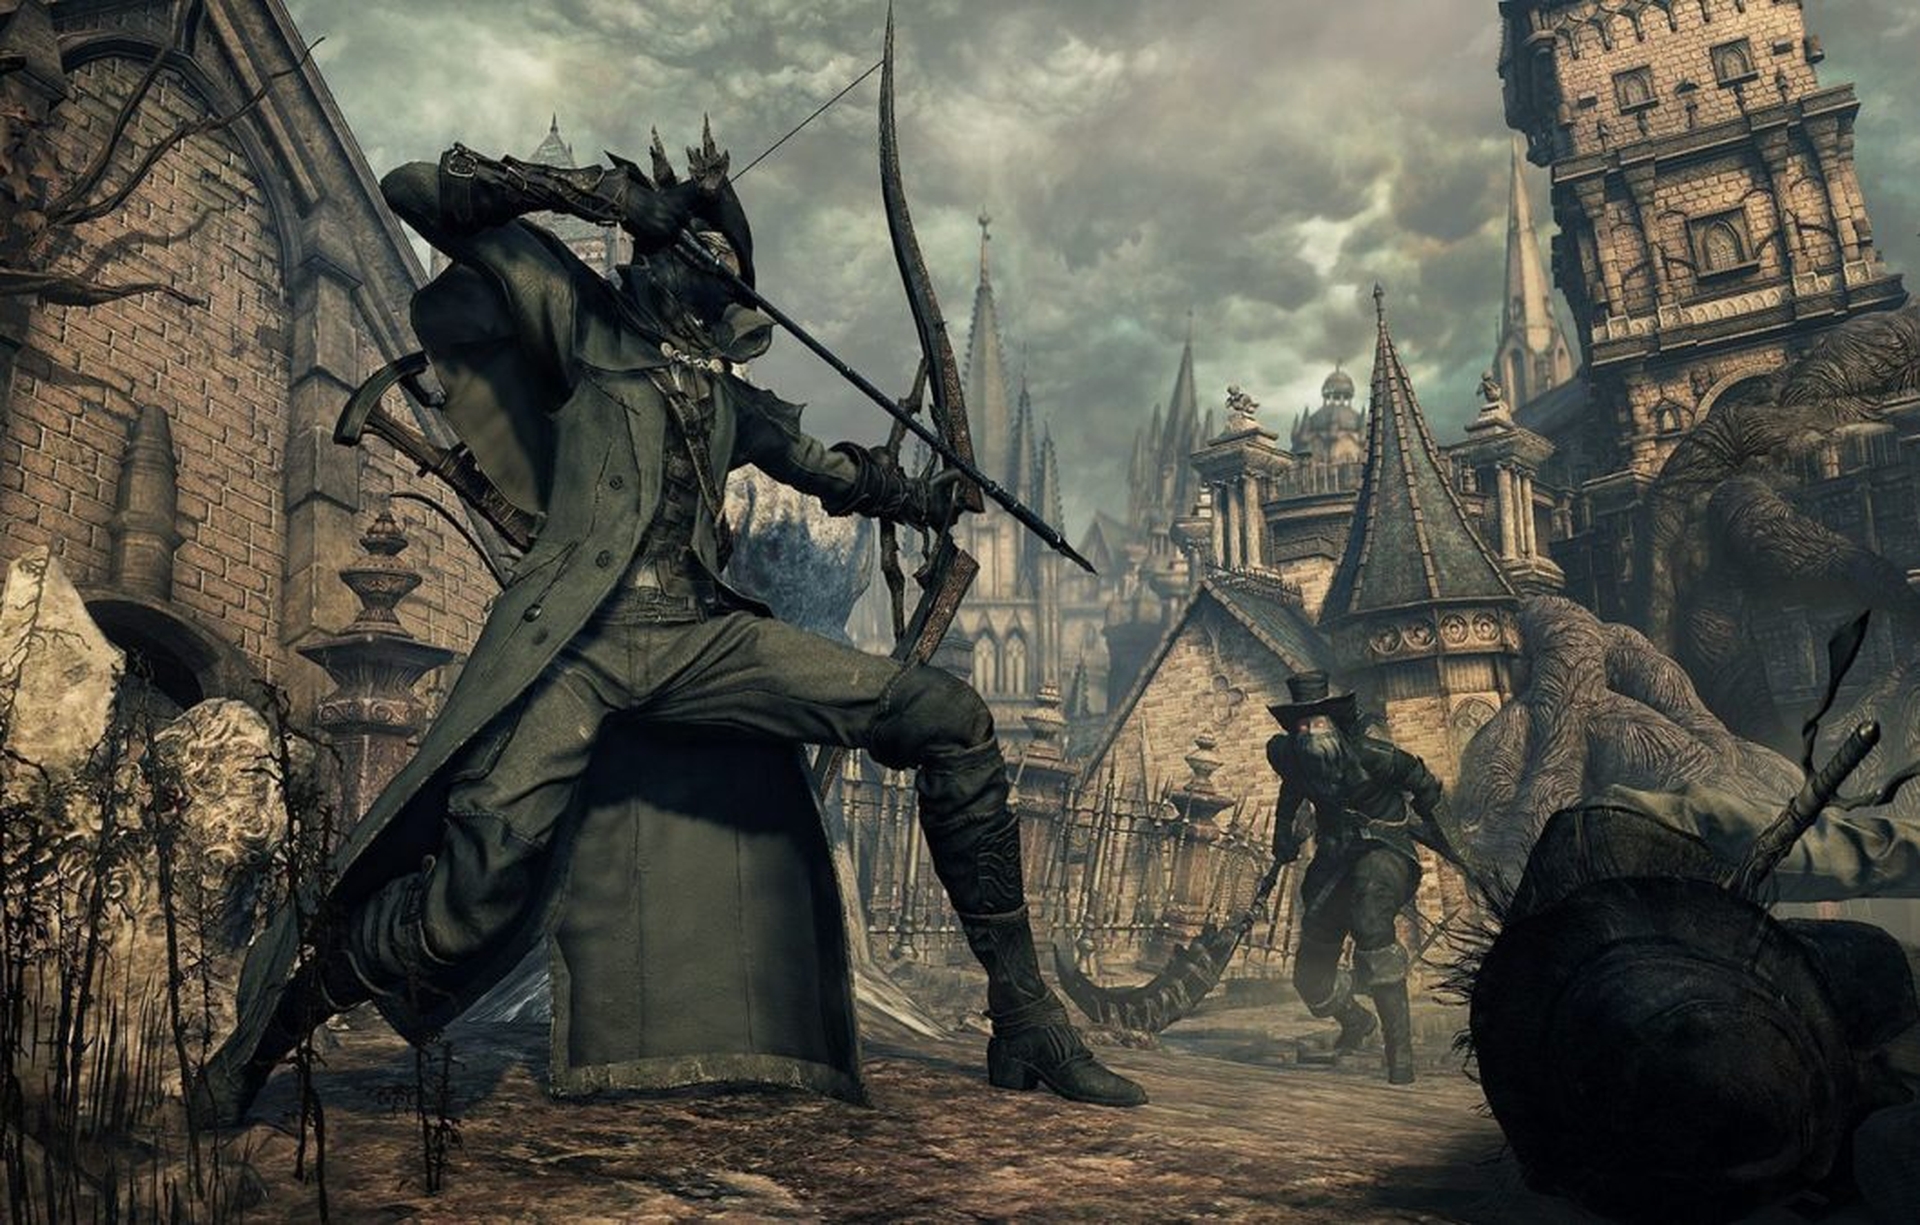 Today, we are going to be going over is a Bloodborne PC remake on its way, as there have been many rumors in the past years but no official announcement.